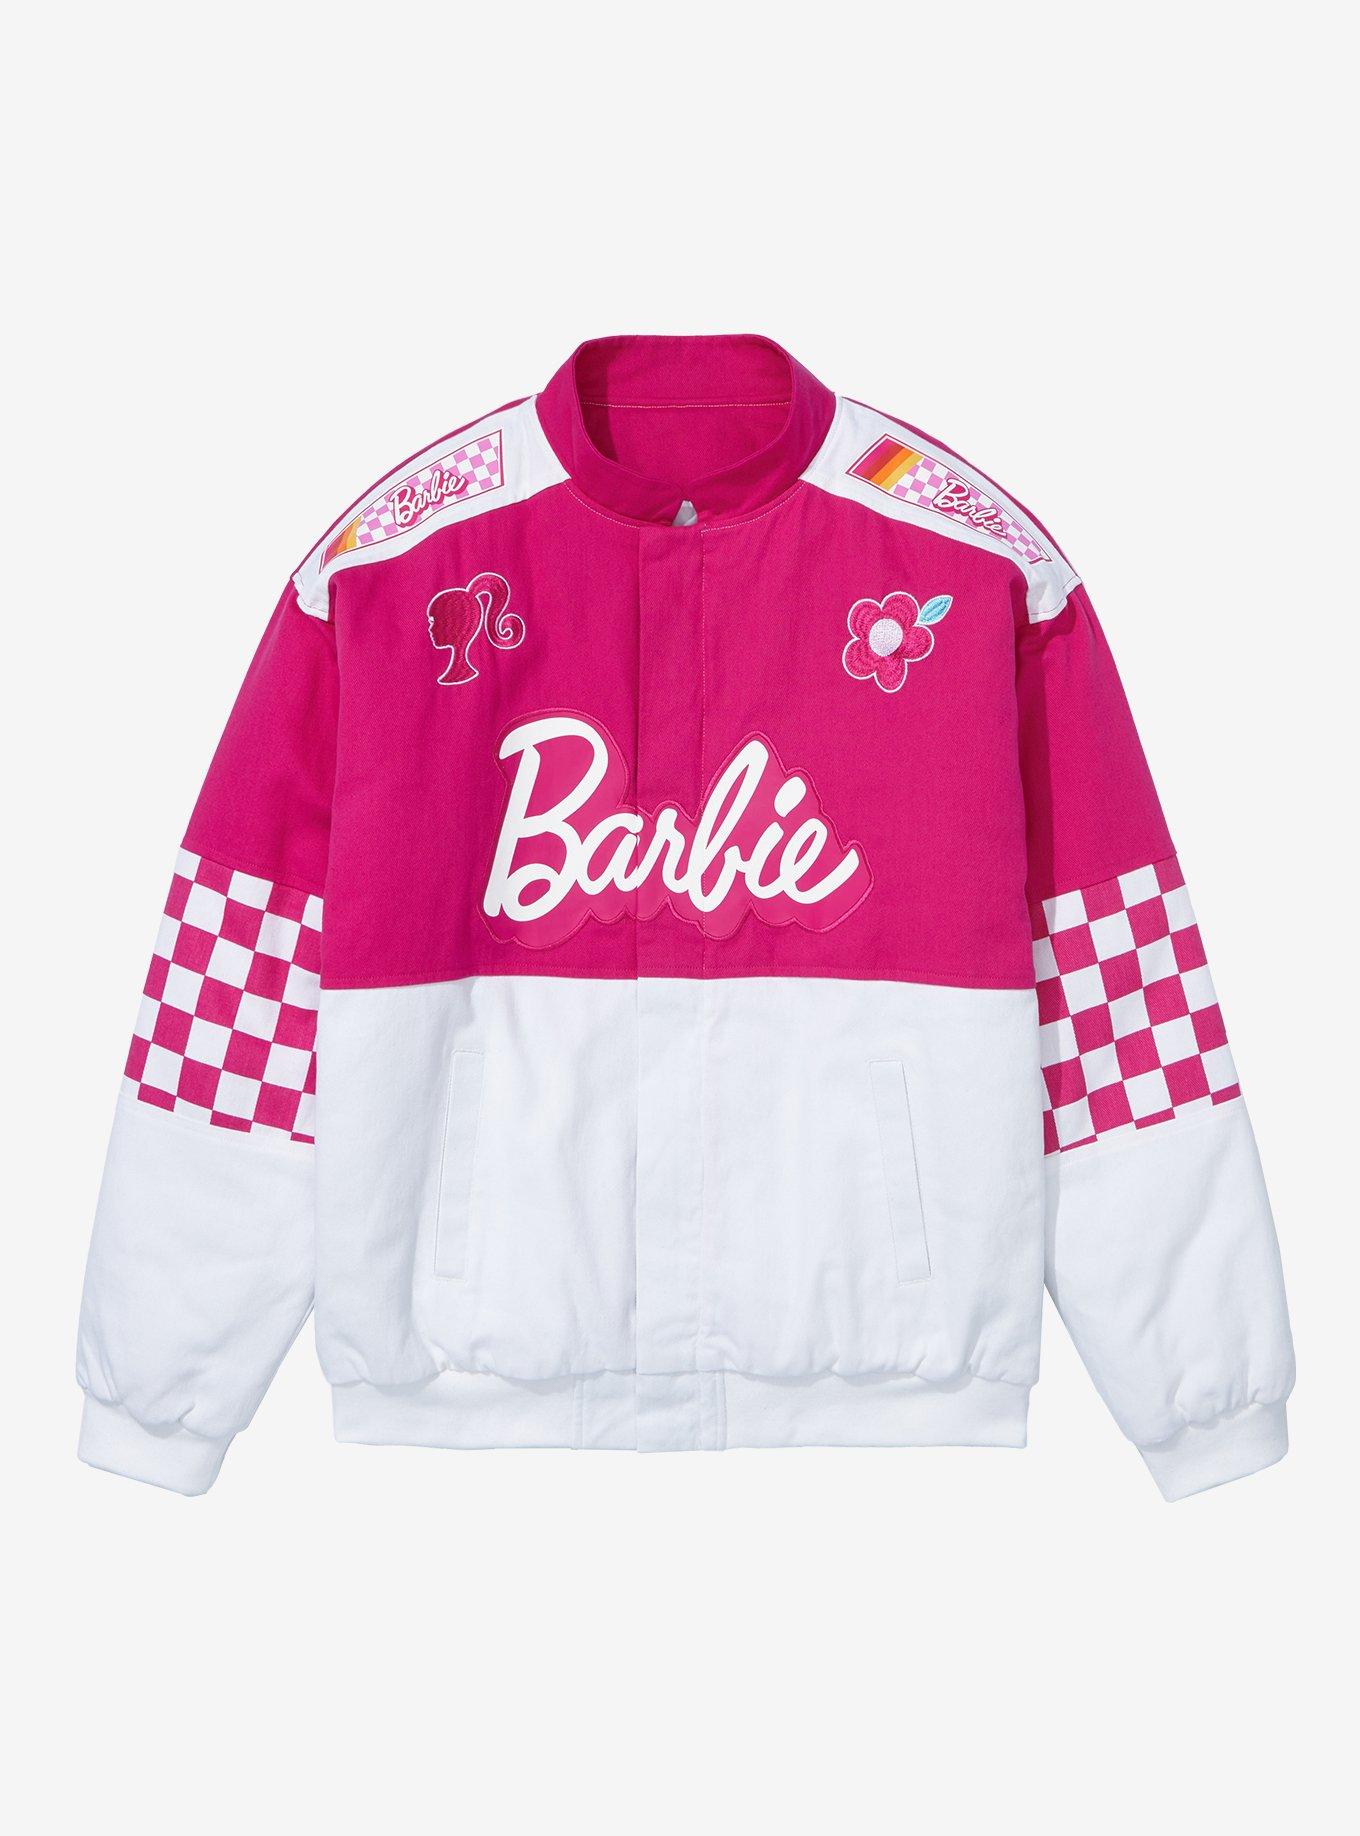 BoxLunch Exclusive Jackets and Jerseys - Assemble Your Team with